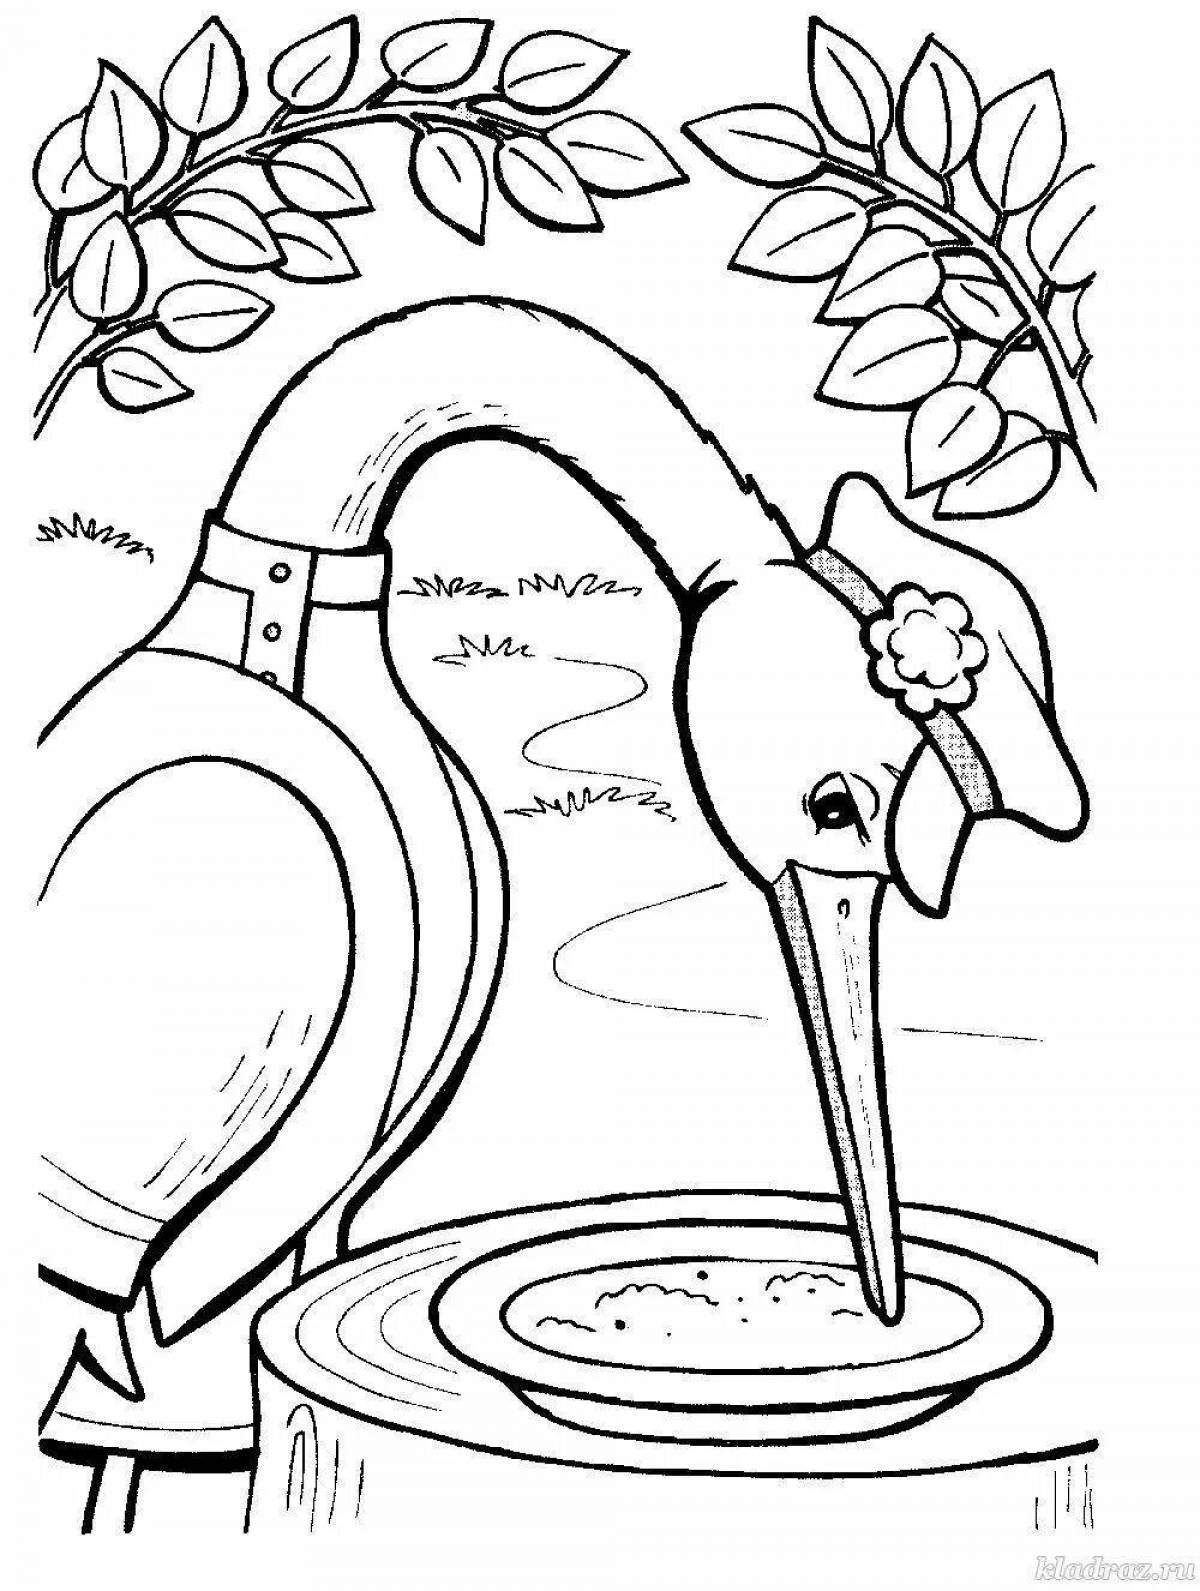 Animated fox and jug coloring page